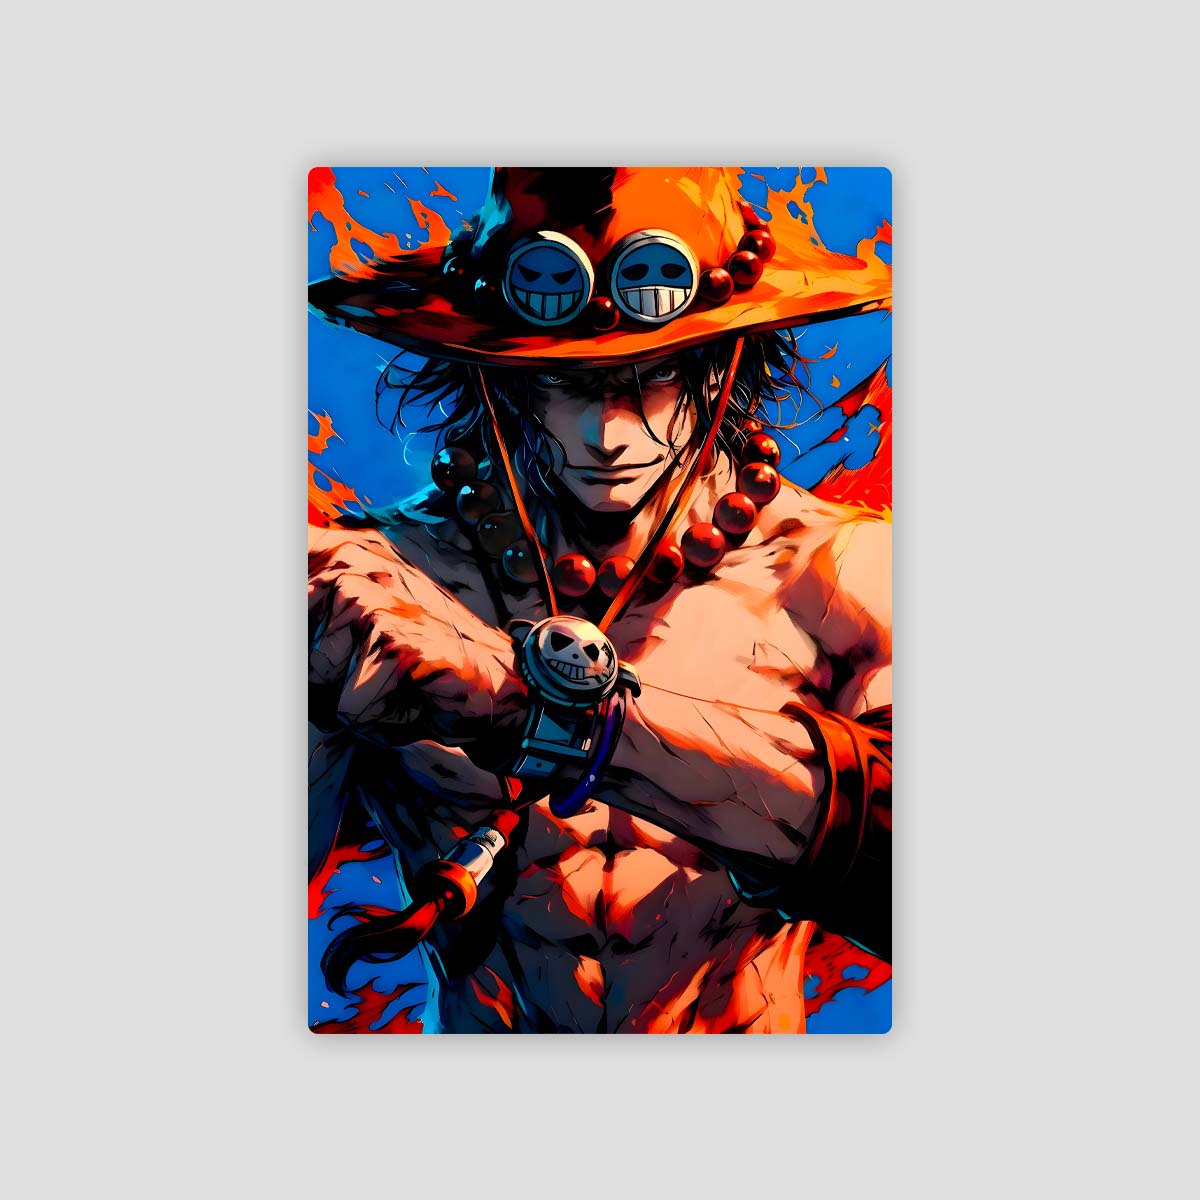 Portgas D. Ace - One Piece - Metal Poster